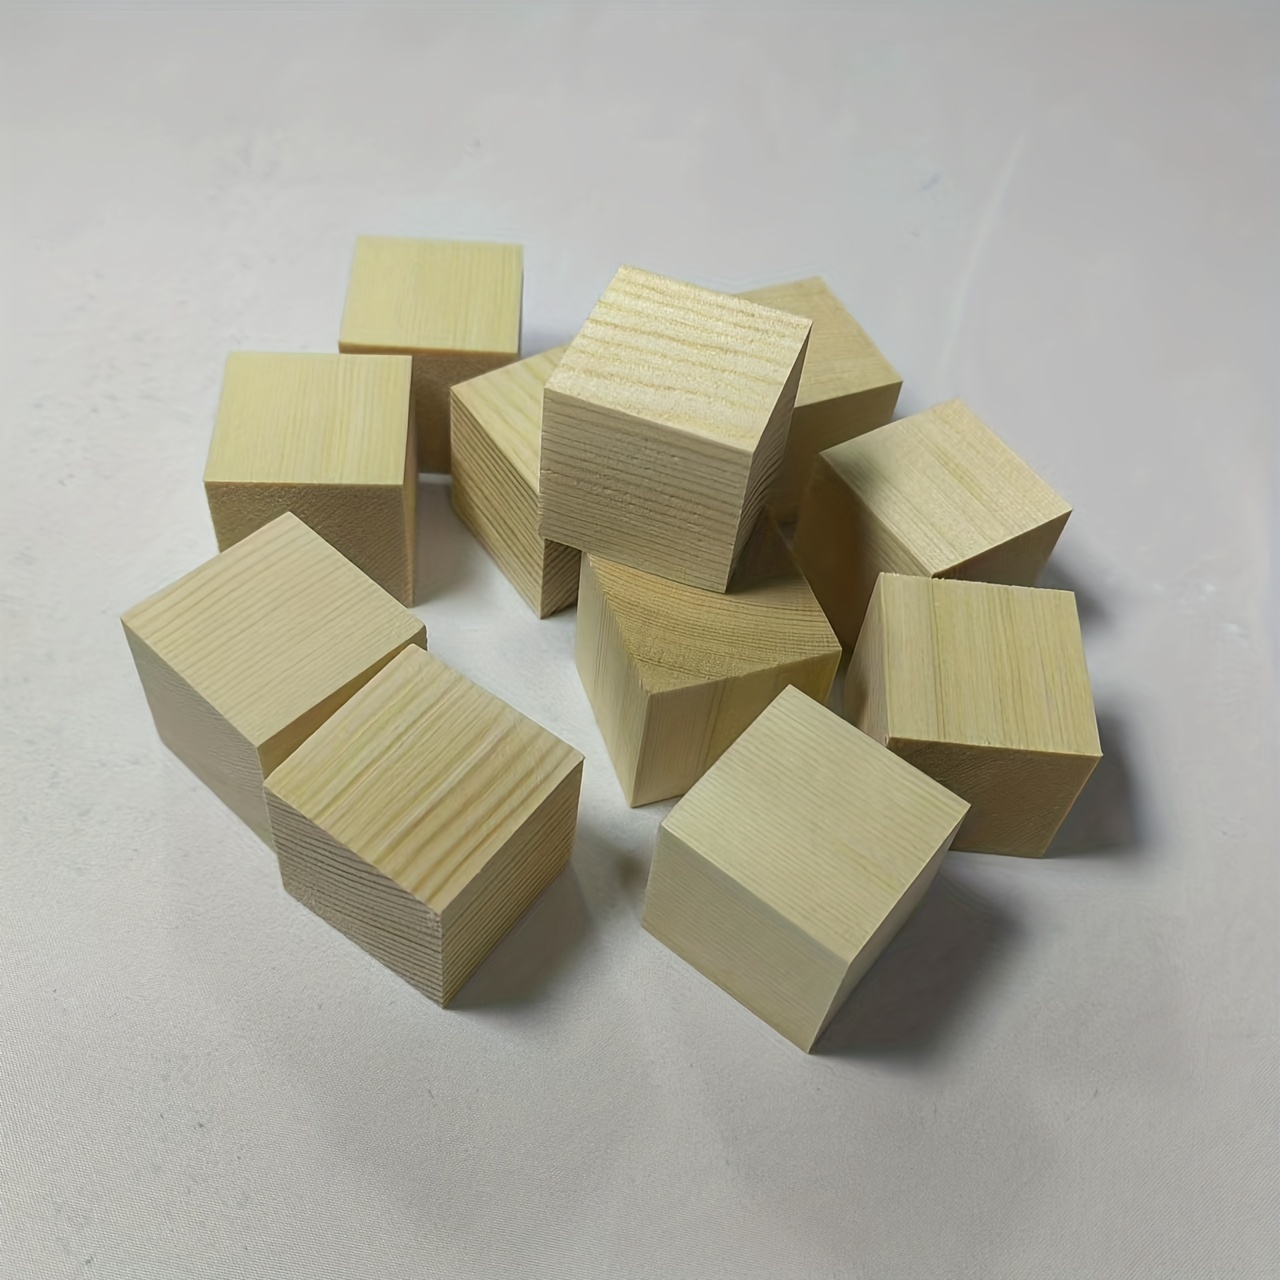 wooden cubes 1 inch